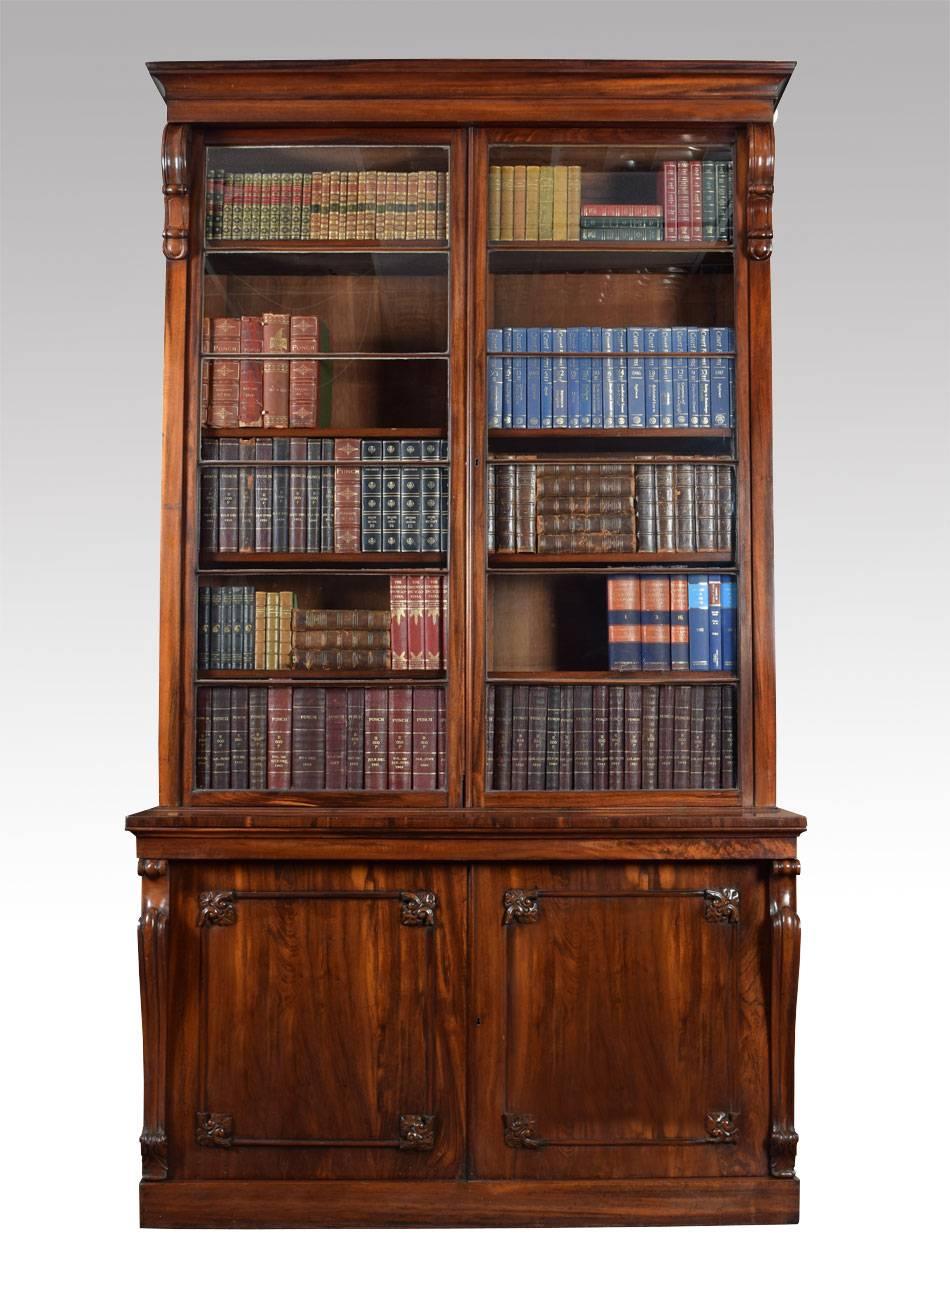 Regency library bookcase the projecting cornice above two large glazed doors enclosing 5 adjustable shelves to each side the base section fitted with panelled cupboard doors opening to reveal one large shelf all raised up on a plinth